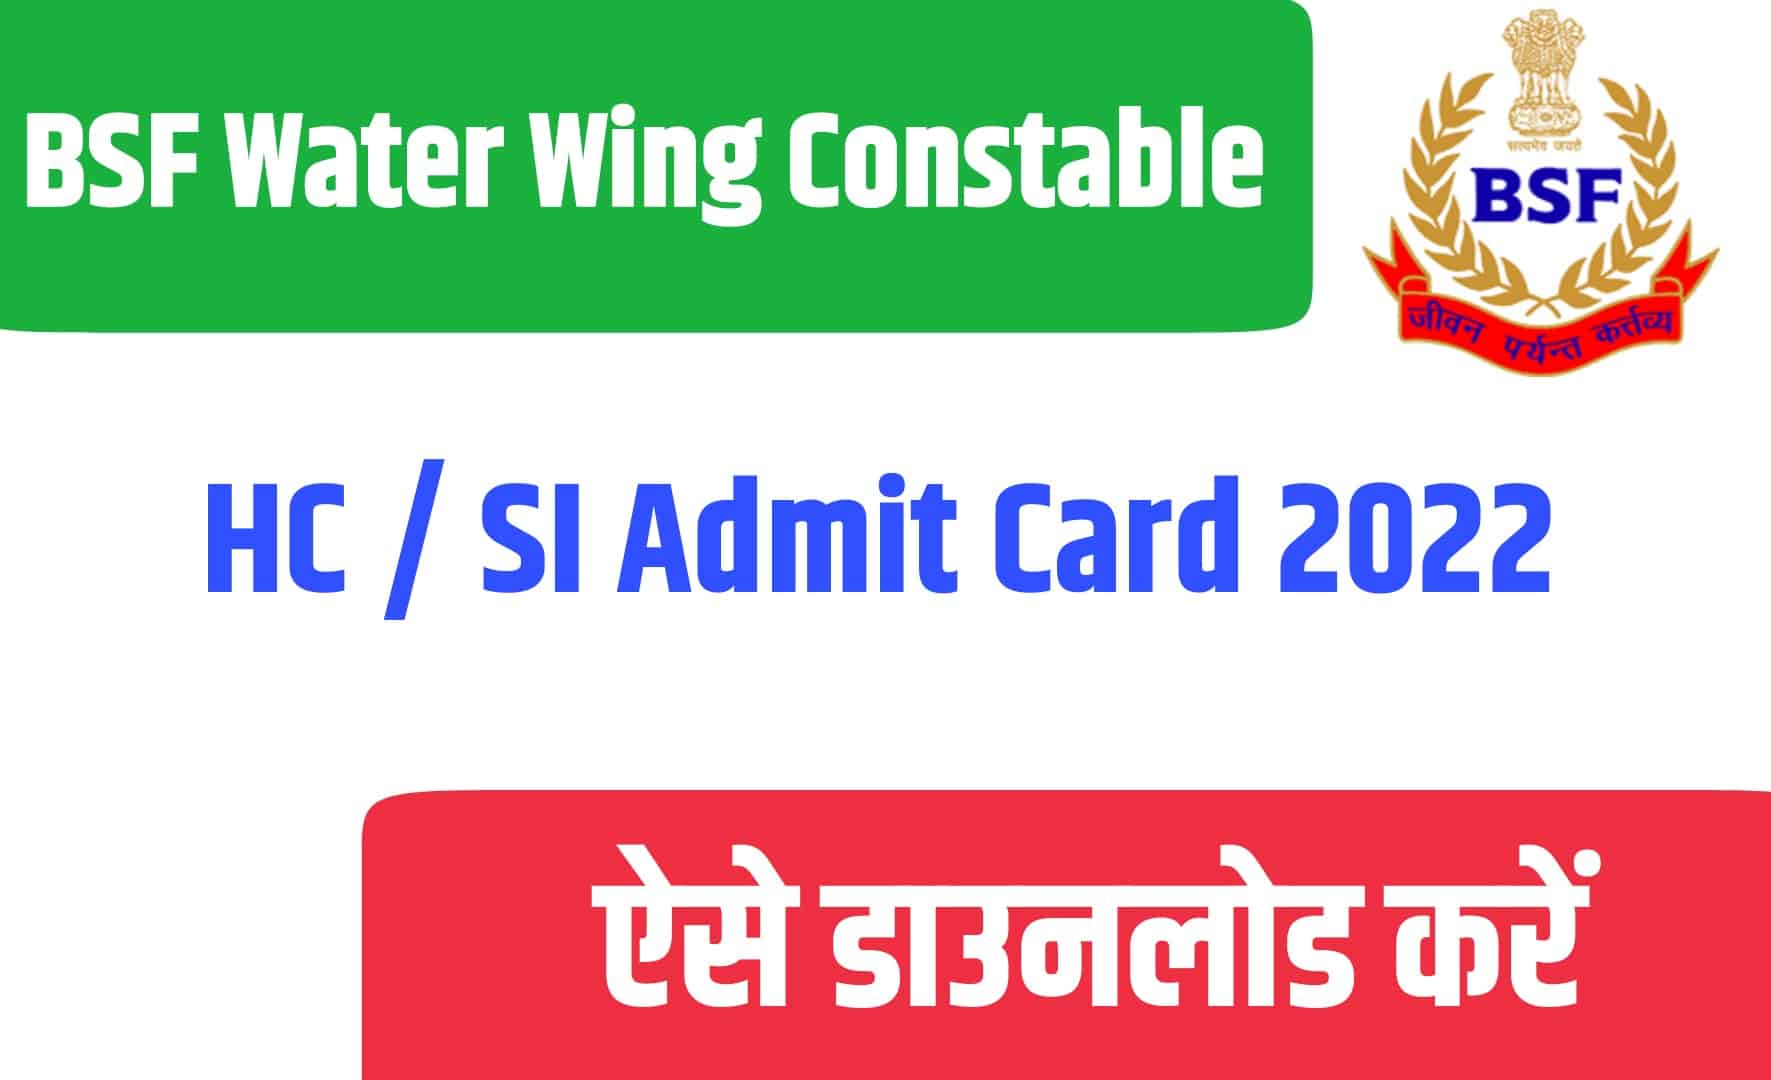 BSF Water Wing Constable / HC / SI Admit Card 2022